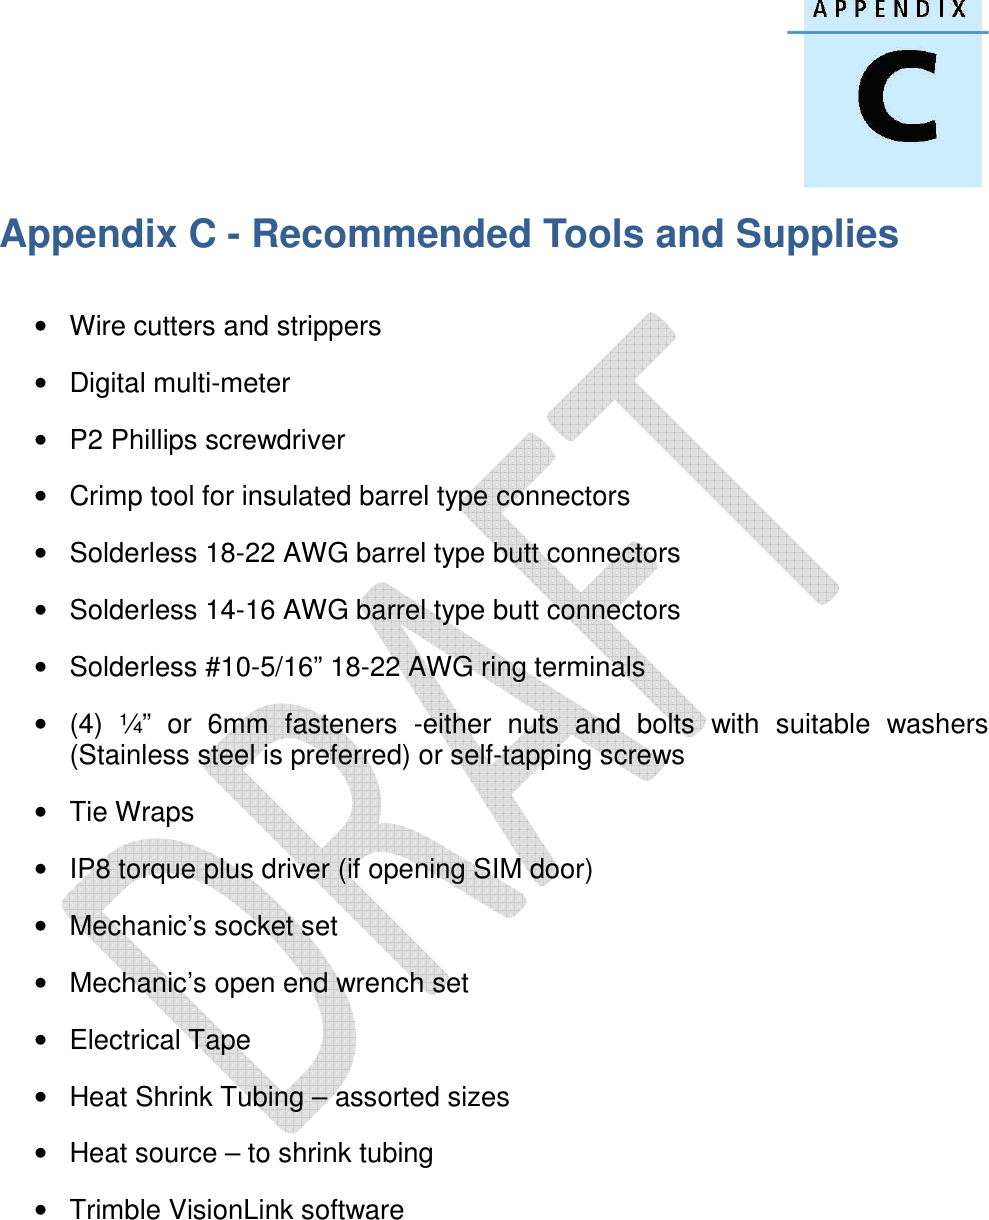   Appendix C - Recommended Tools and Supplies  •  Wire cutters and strippers •  Digital multi-meter •  P2 Phillips screwdriver •  Crimp tool for insulated barrel type connectors •  Solderless 18-22 AWG barrel type butt connectors •  Solderless 14-16 AWG barrel type butt connectors •  Solderless #10-5/16” 18-22 AWG ring terminals •  (4)  ¼”  or  6mm  fasteners  -either  nuts  and  bolts  with  suitable  washers (Stainless steel is preferred) or self-tapping screws •  Tie Wraps •  IP8 torque plus driver (if opening SIM door) •  Mechanic’s socket set •  Mechanic’s open end wrench set •  Electrical Tape •  Heat Shrink Tubing – assorted sizes •  Heat source – to shrink tubing •  Trimble VisionLink software      